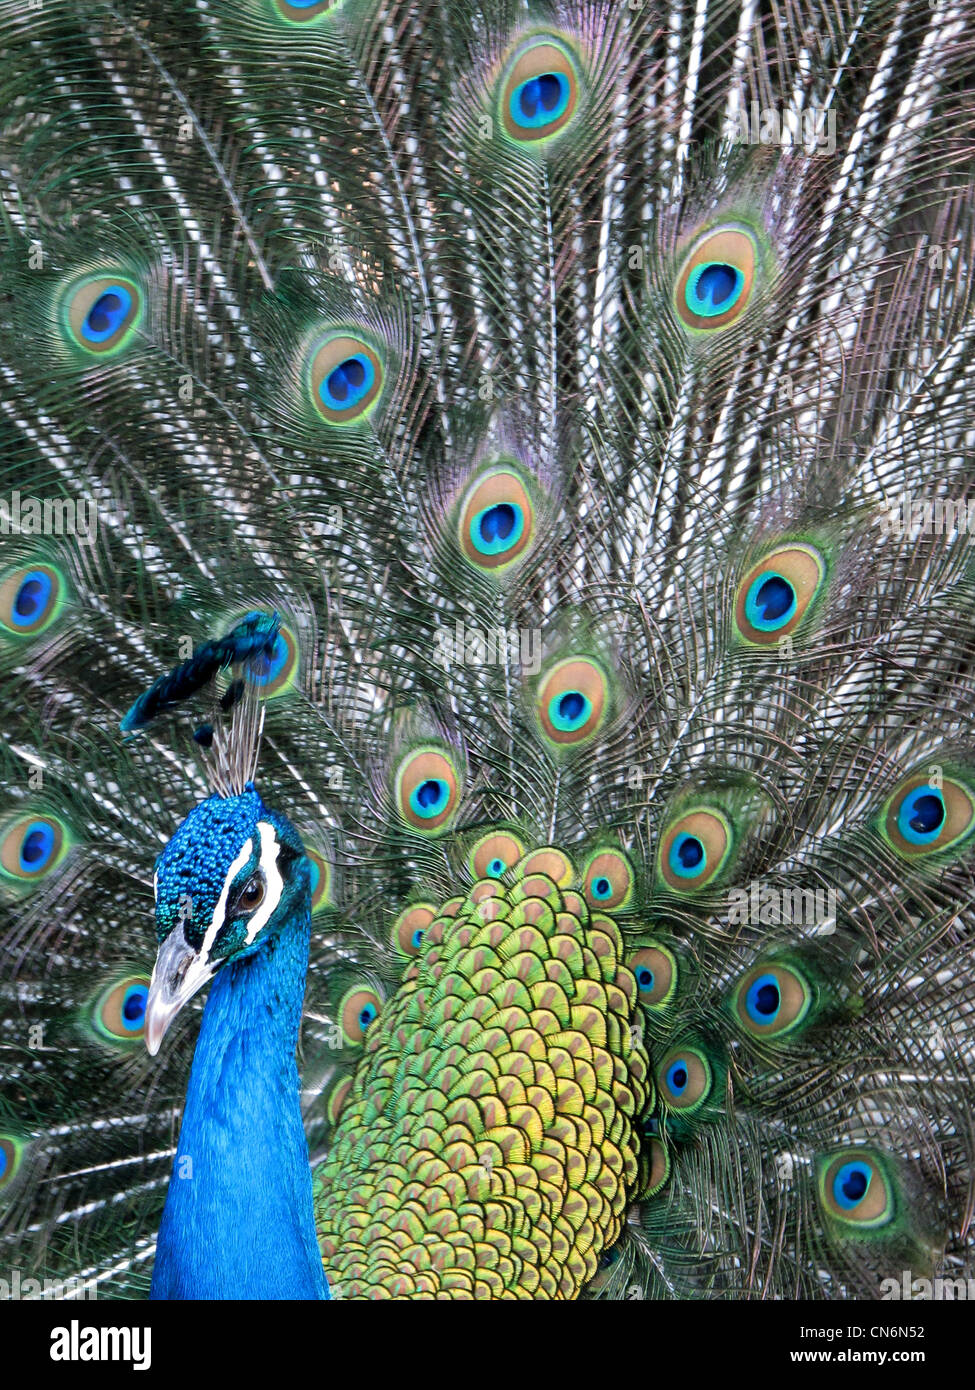 A colorful Peacock with tail feathers spread showing spectacular plumage filling the entire frame of the photograph Stock Photo